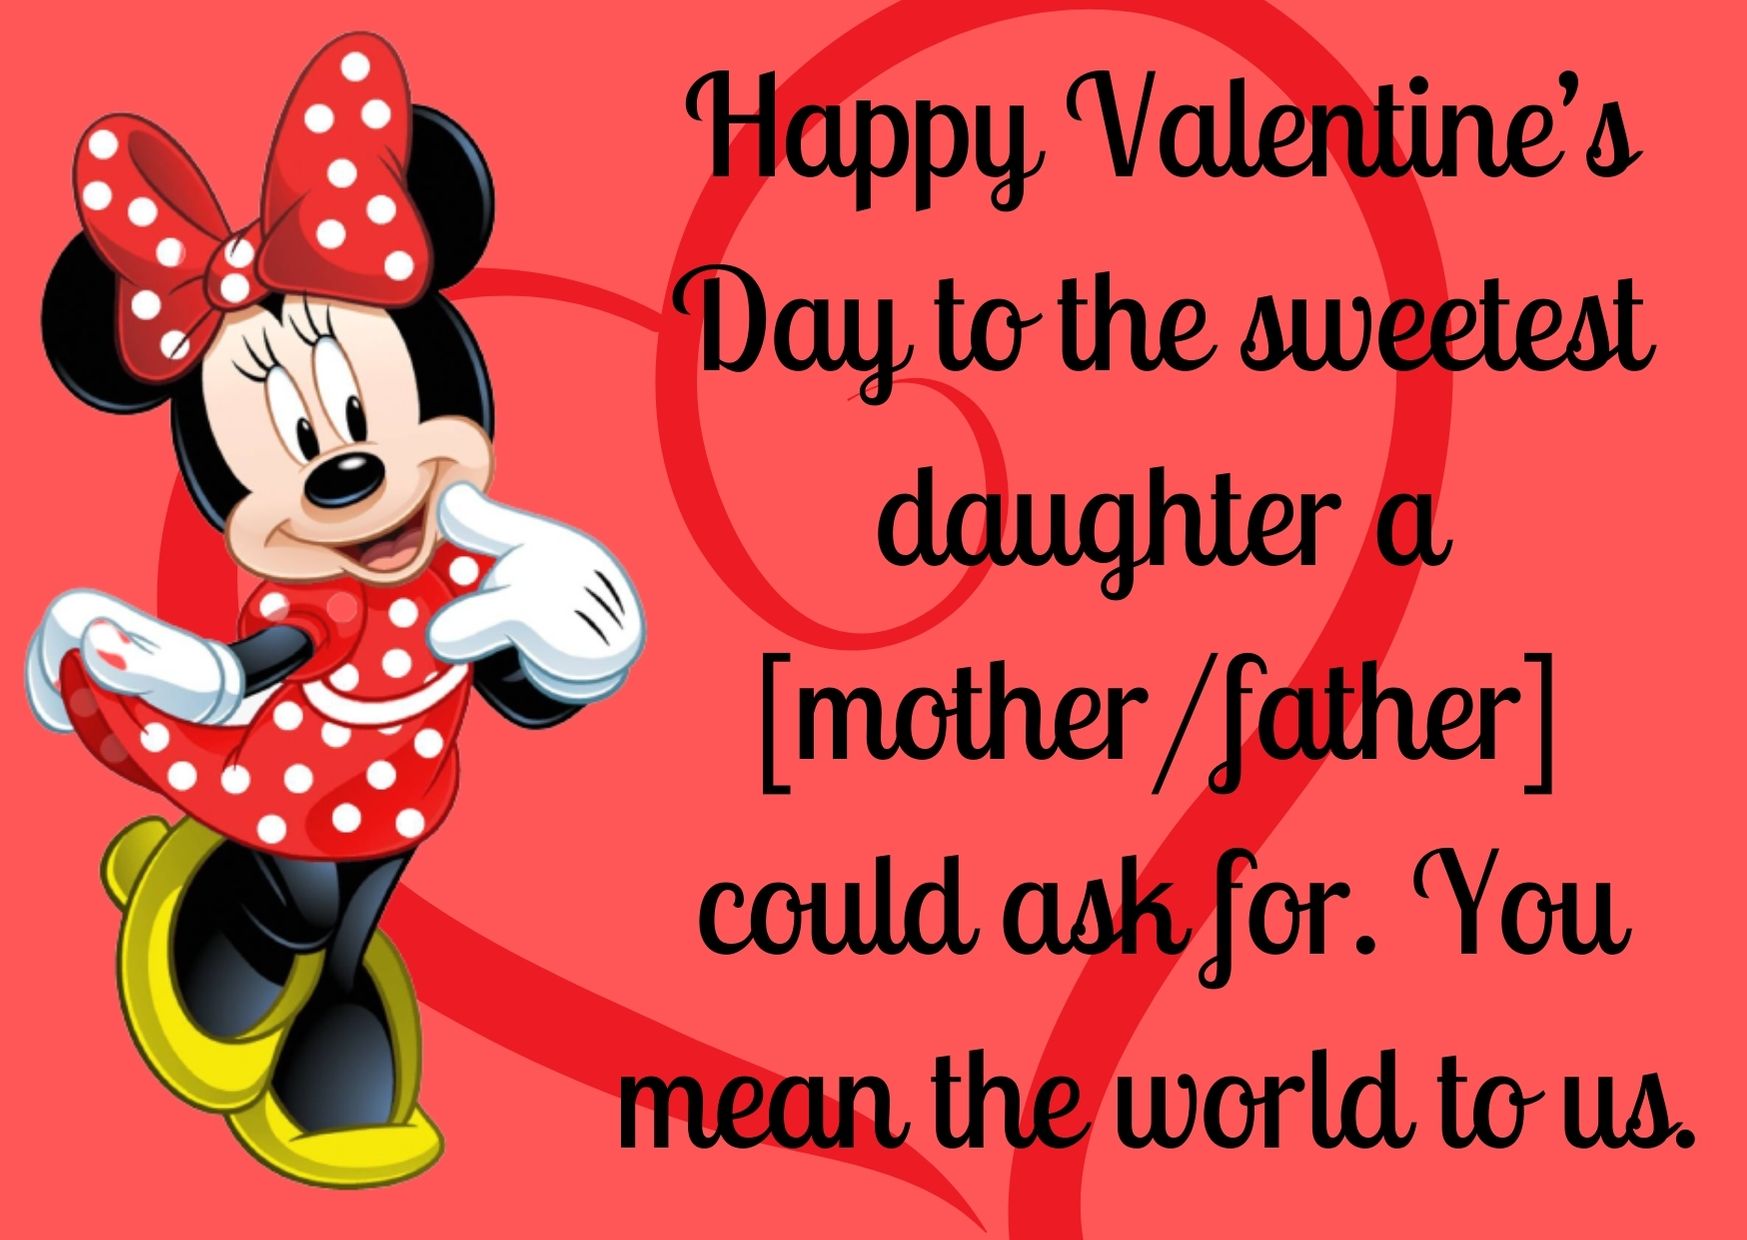 Happy Valentines Day Daughter Wishes and Cards The Quotely